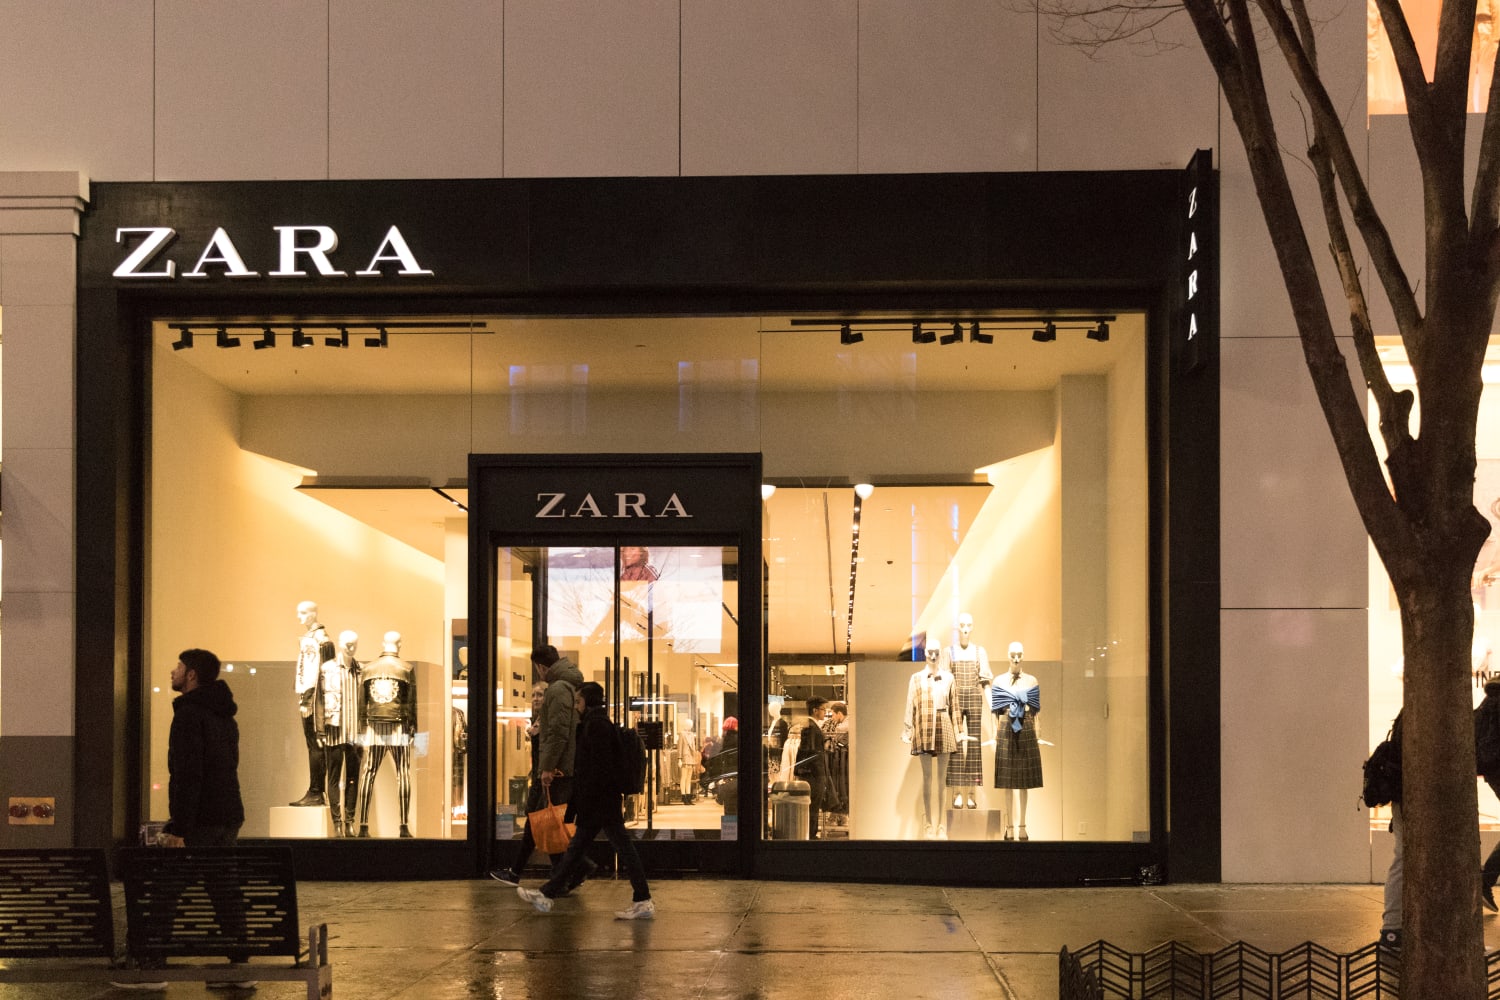 where is zara brand from